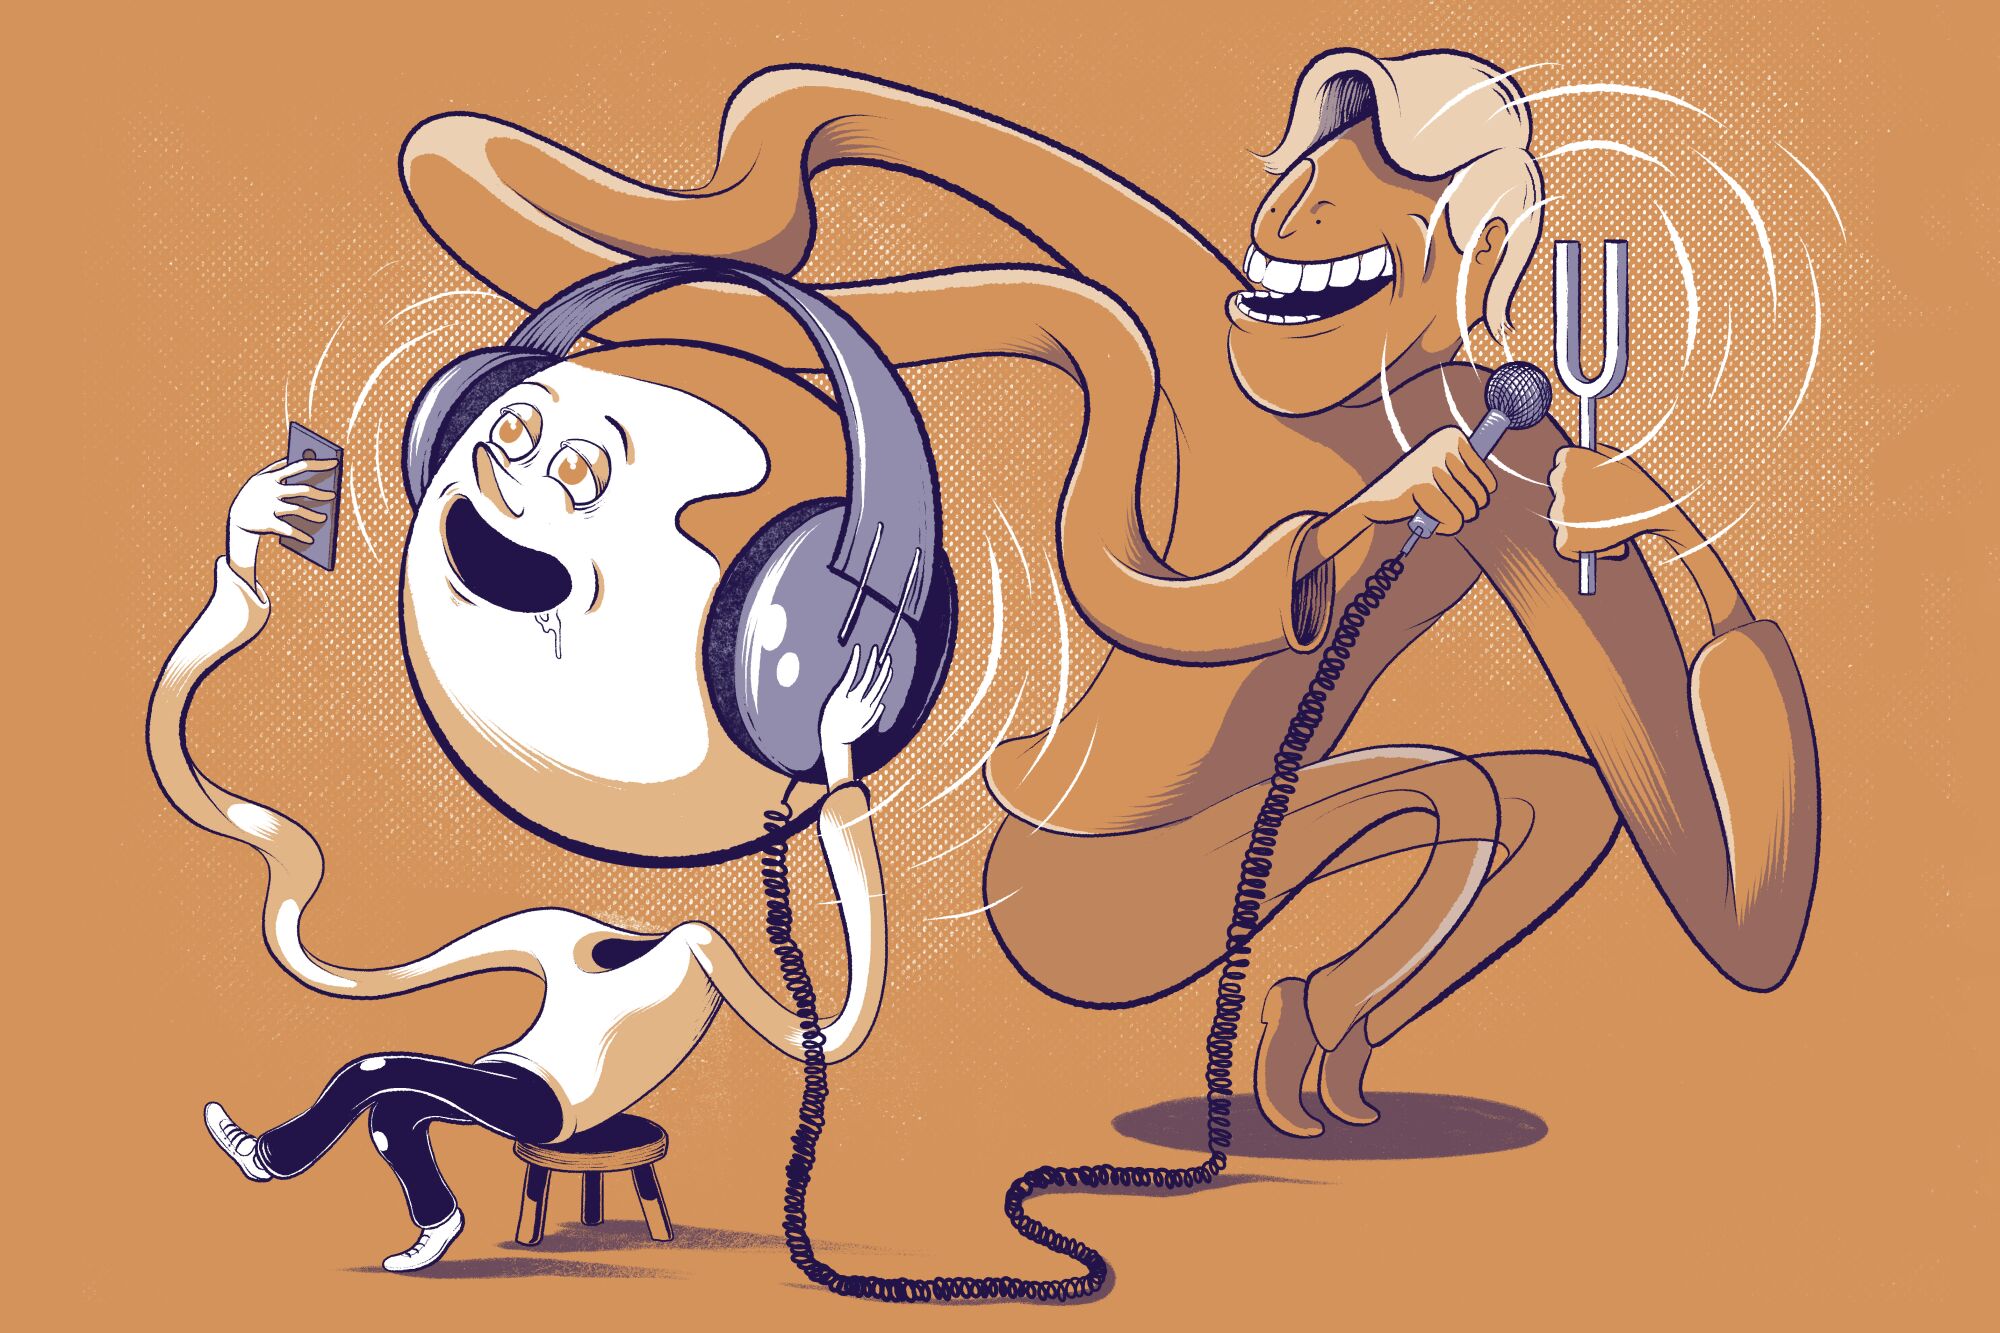 Illustration shows devlish figure playing a sound into a mic hooked up to headphones another animated figure is listening to